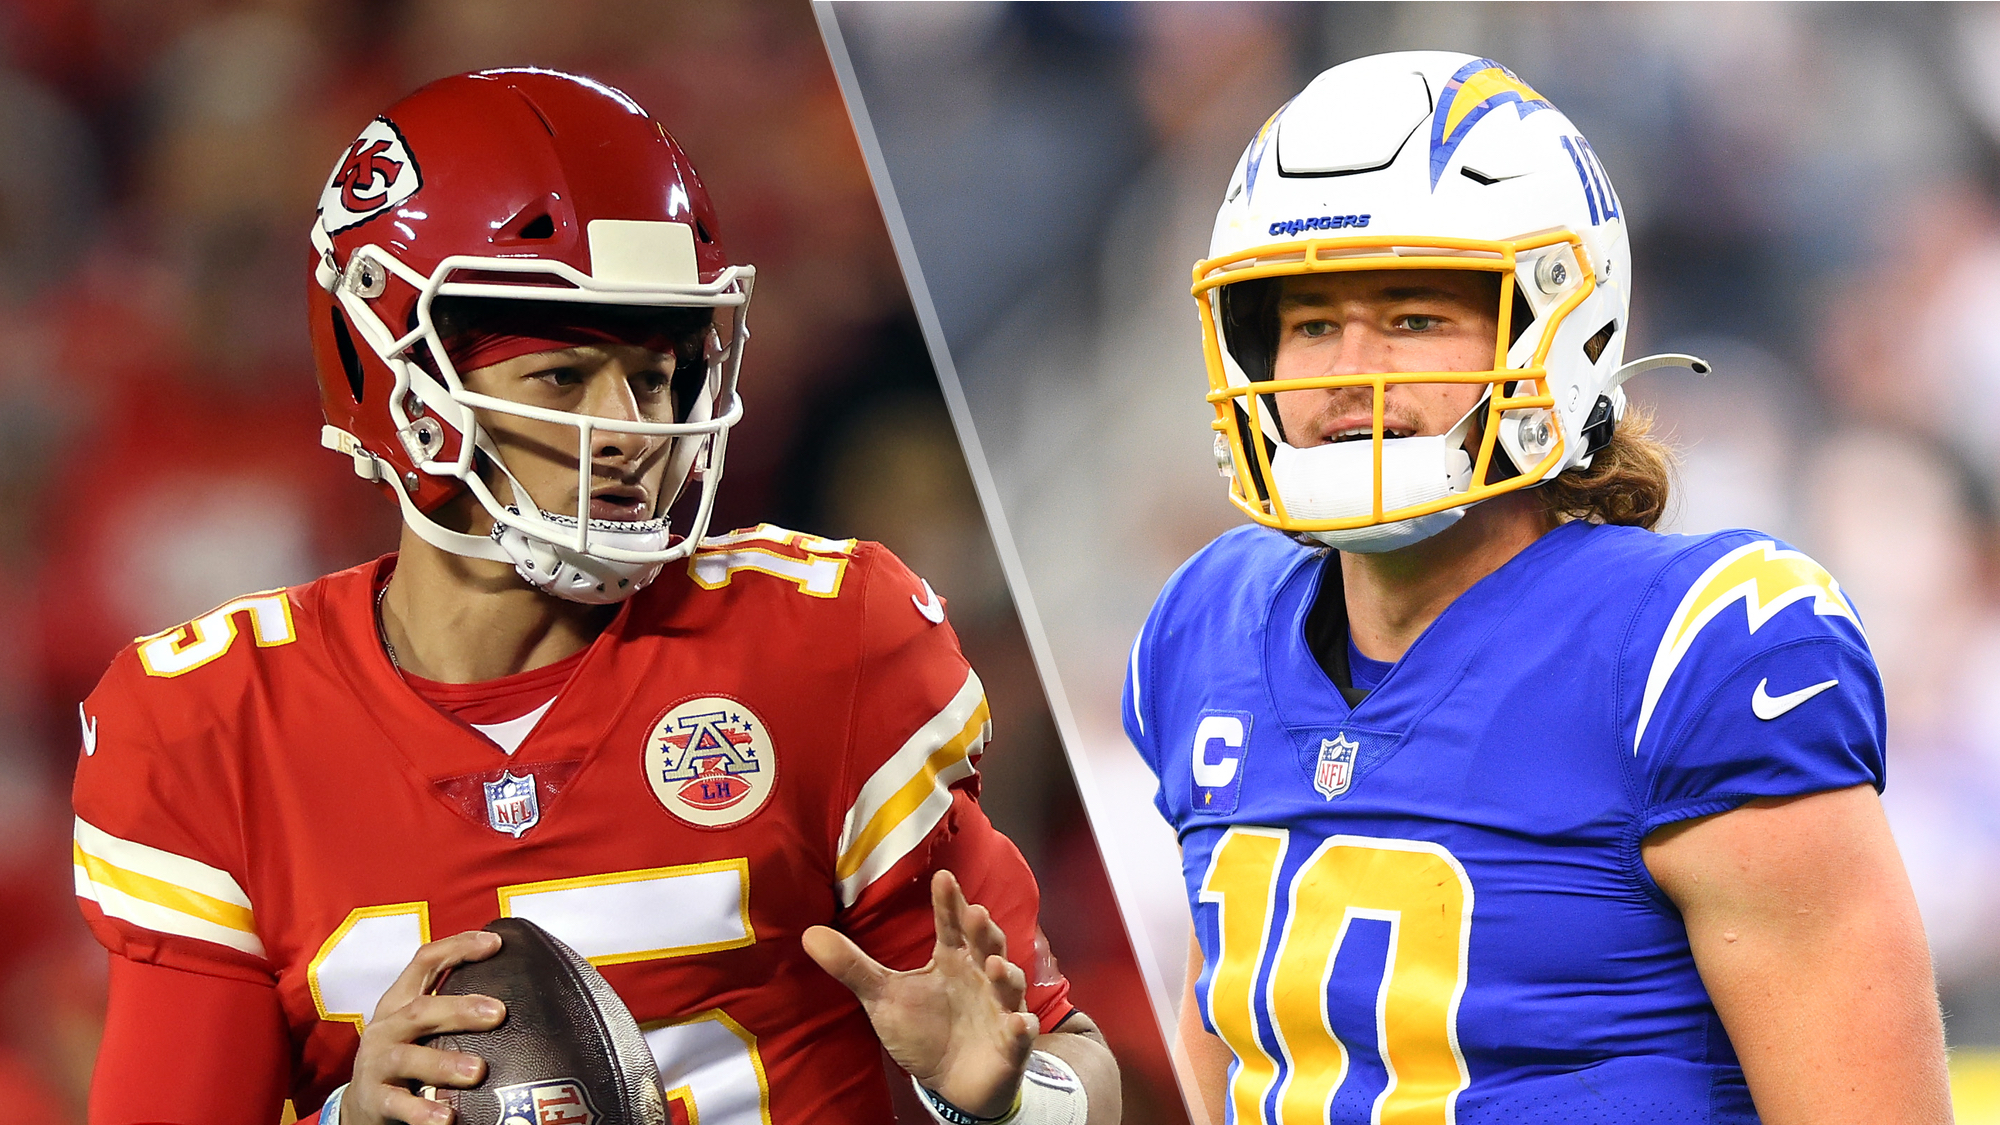 2021 chargers vs chiefs